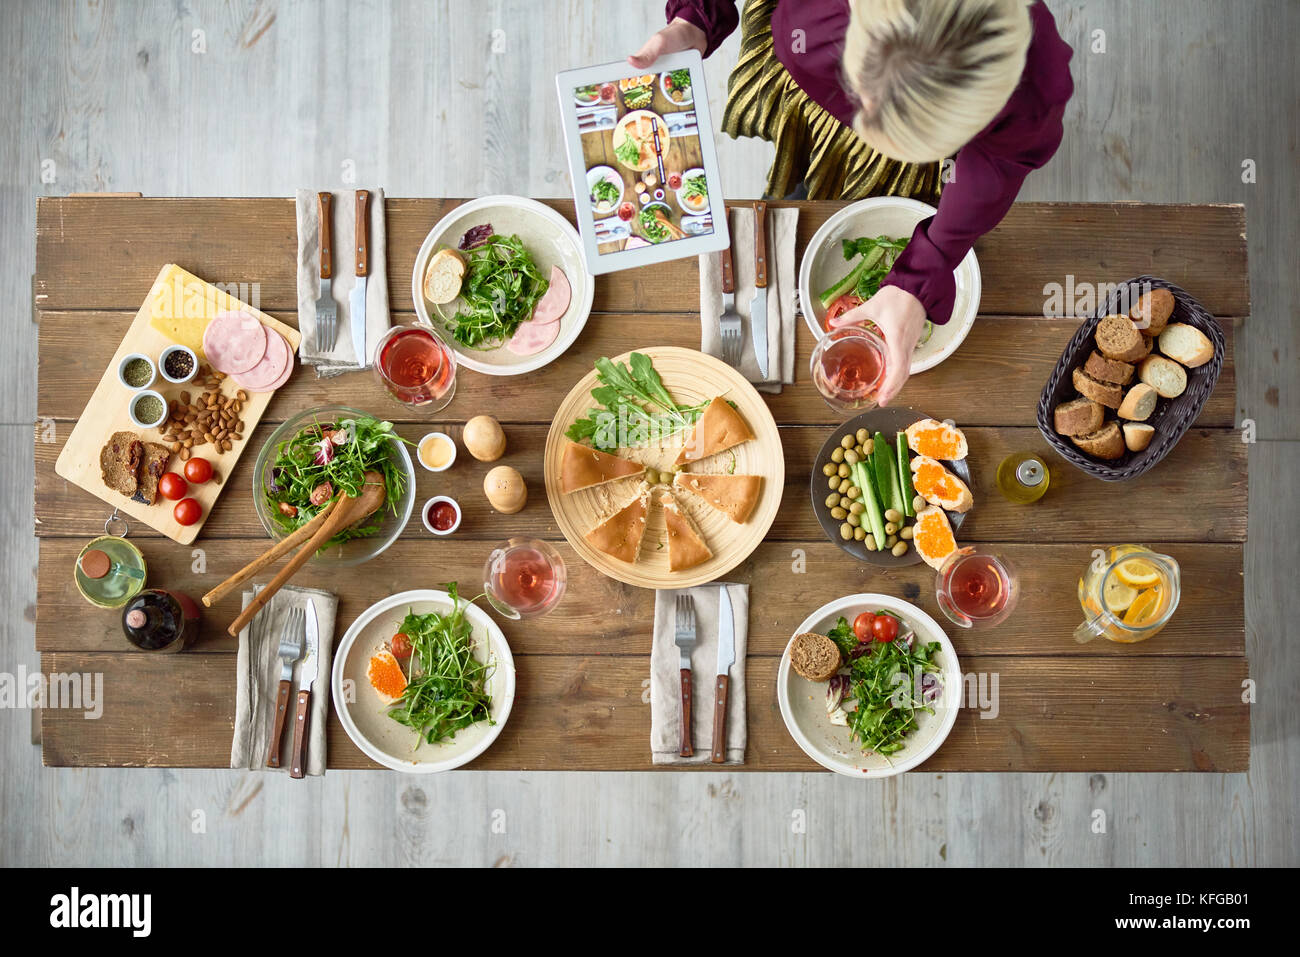 Festive Dinner Table with Food Stock Photo